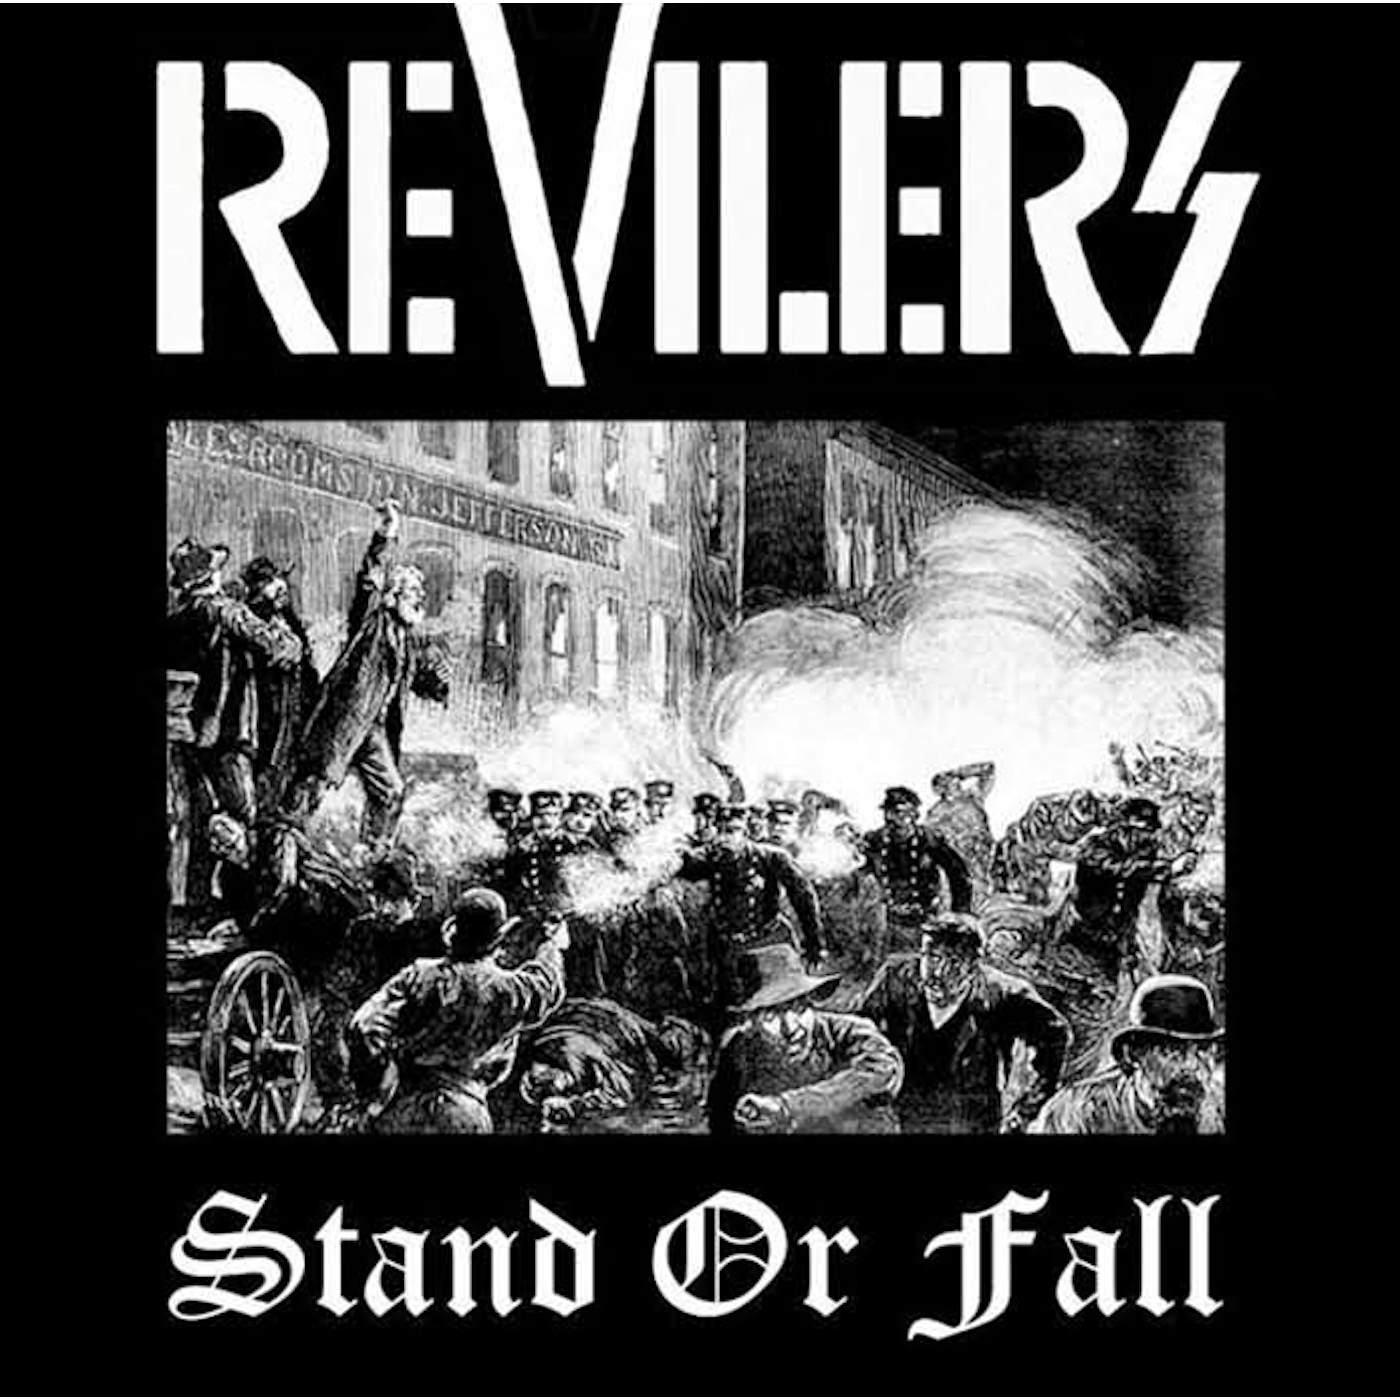 Revilers STAND OR FALL Vinyl Record